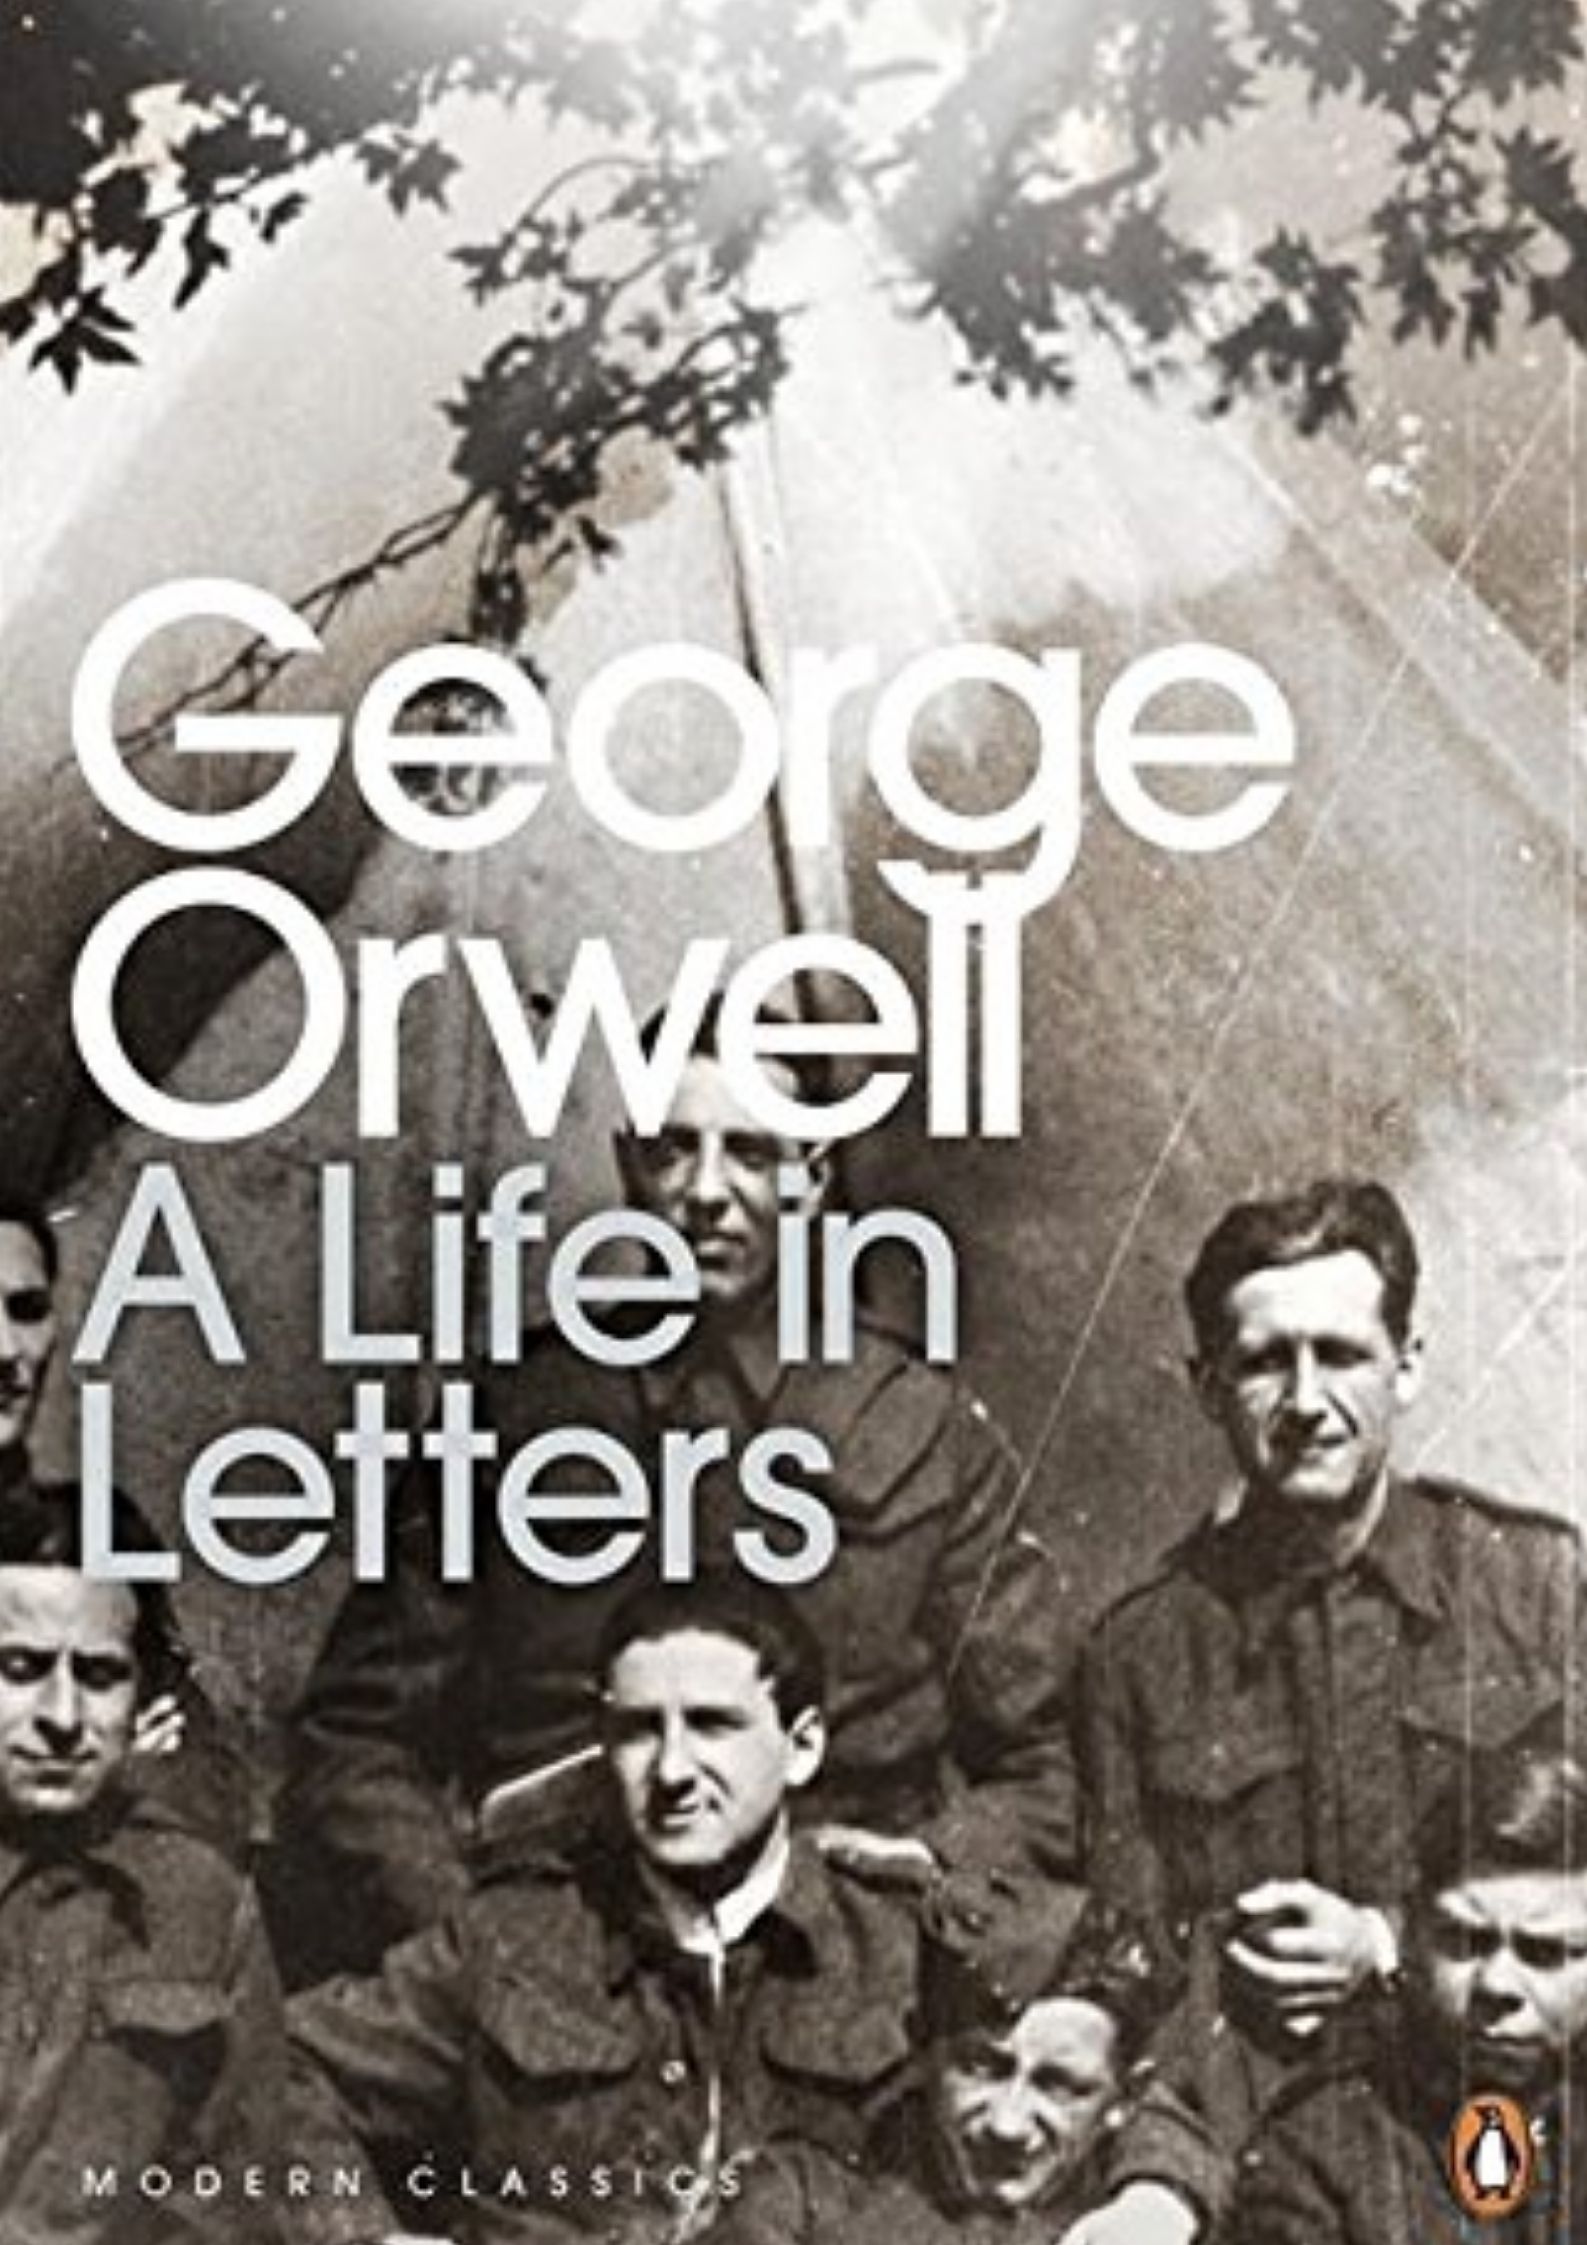 A Life in Letters book by George Orwell